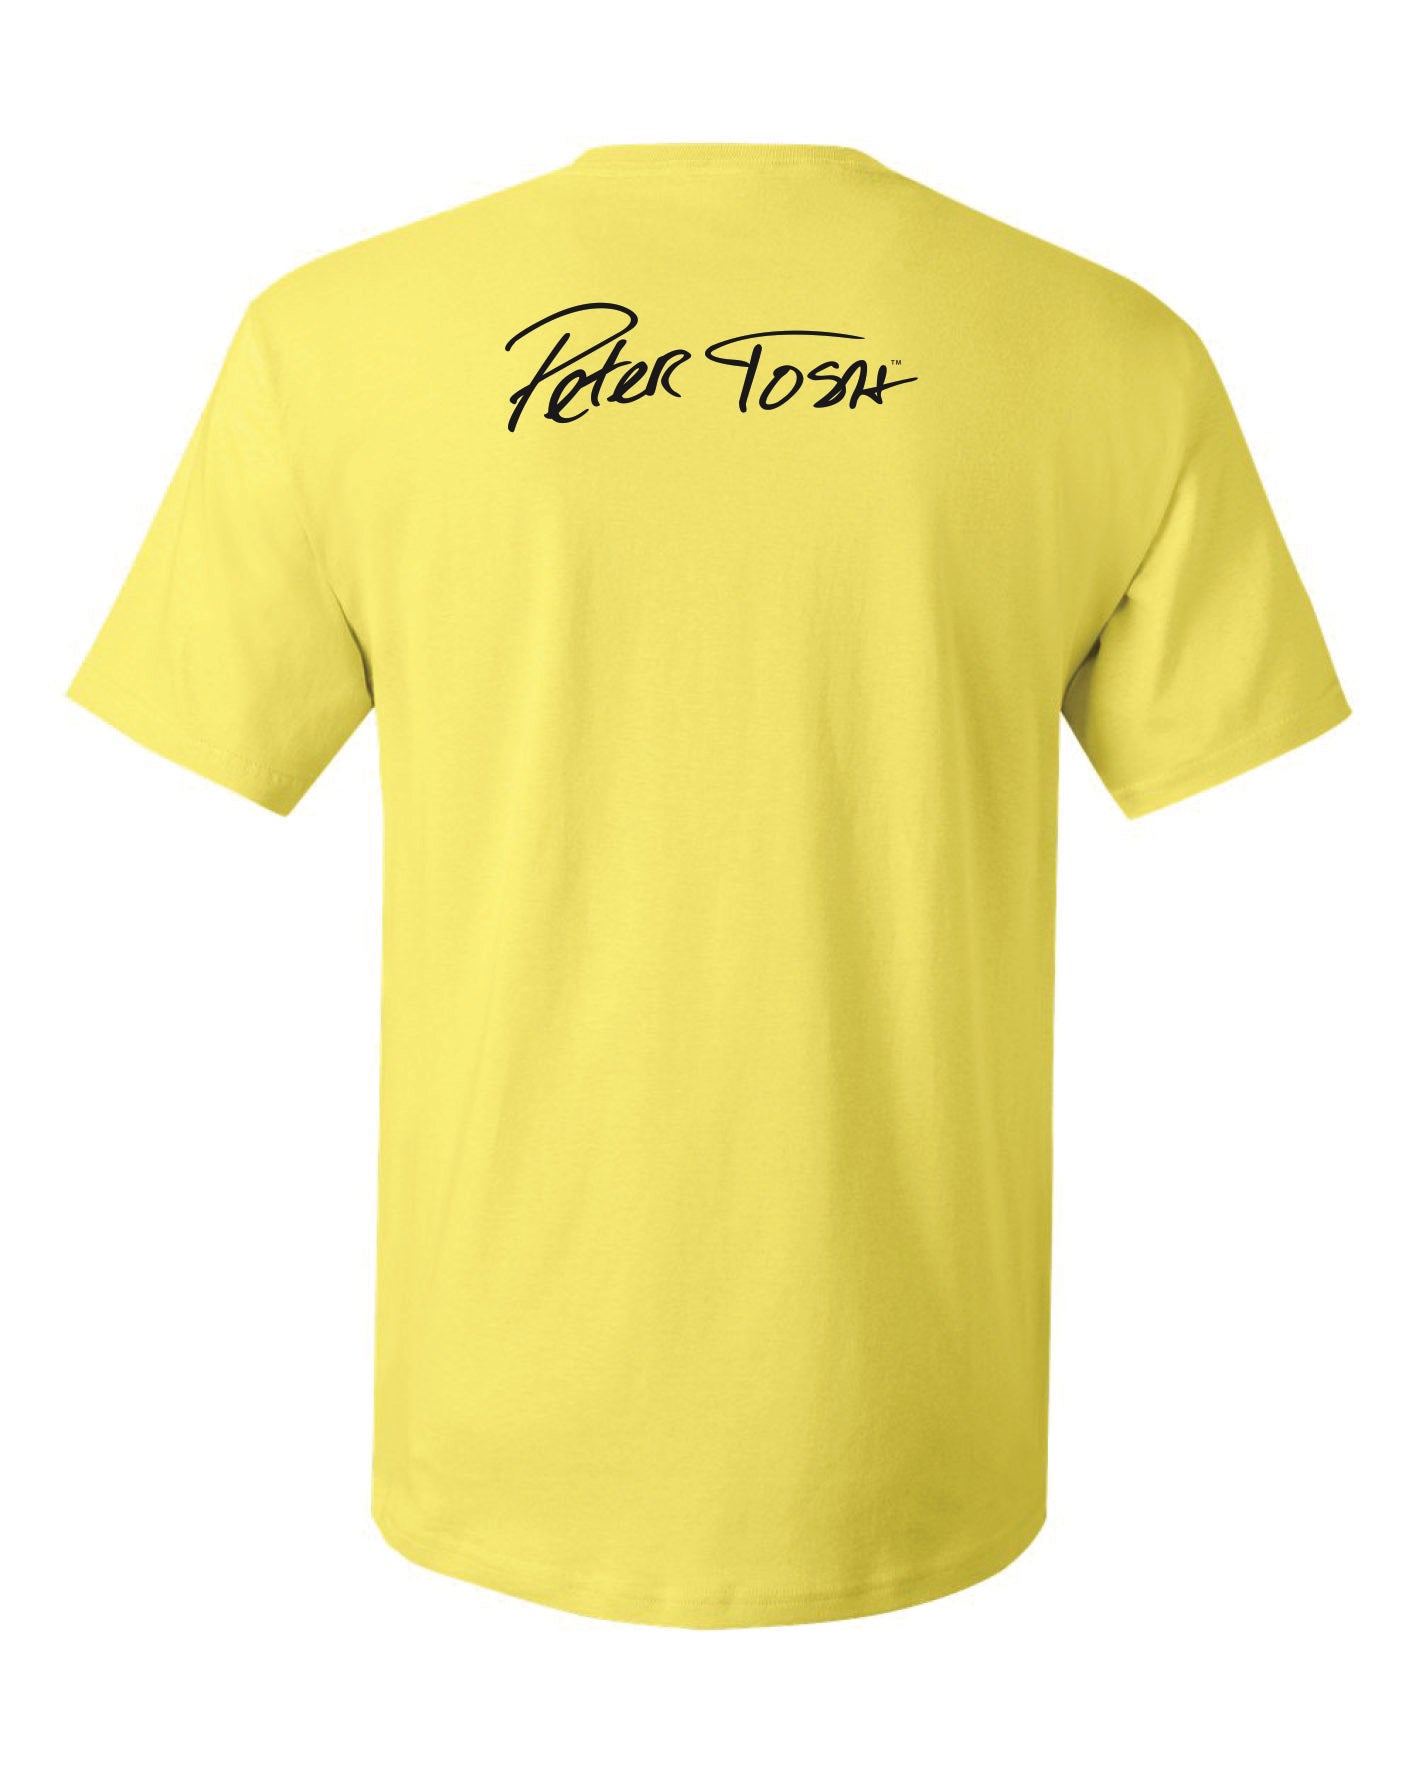 Peter Tosh Can't Blame The Youth Tee